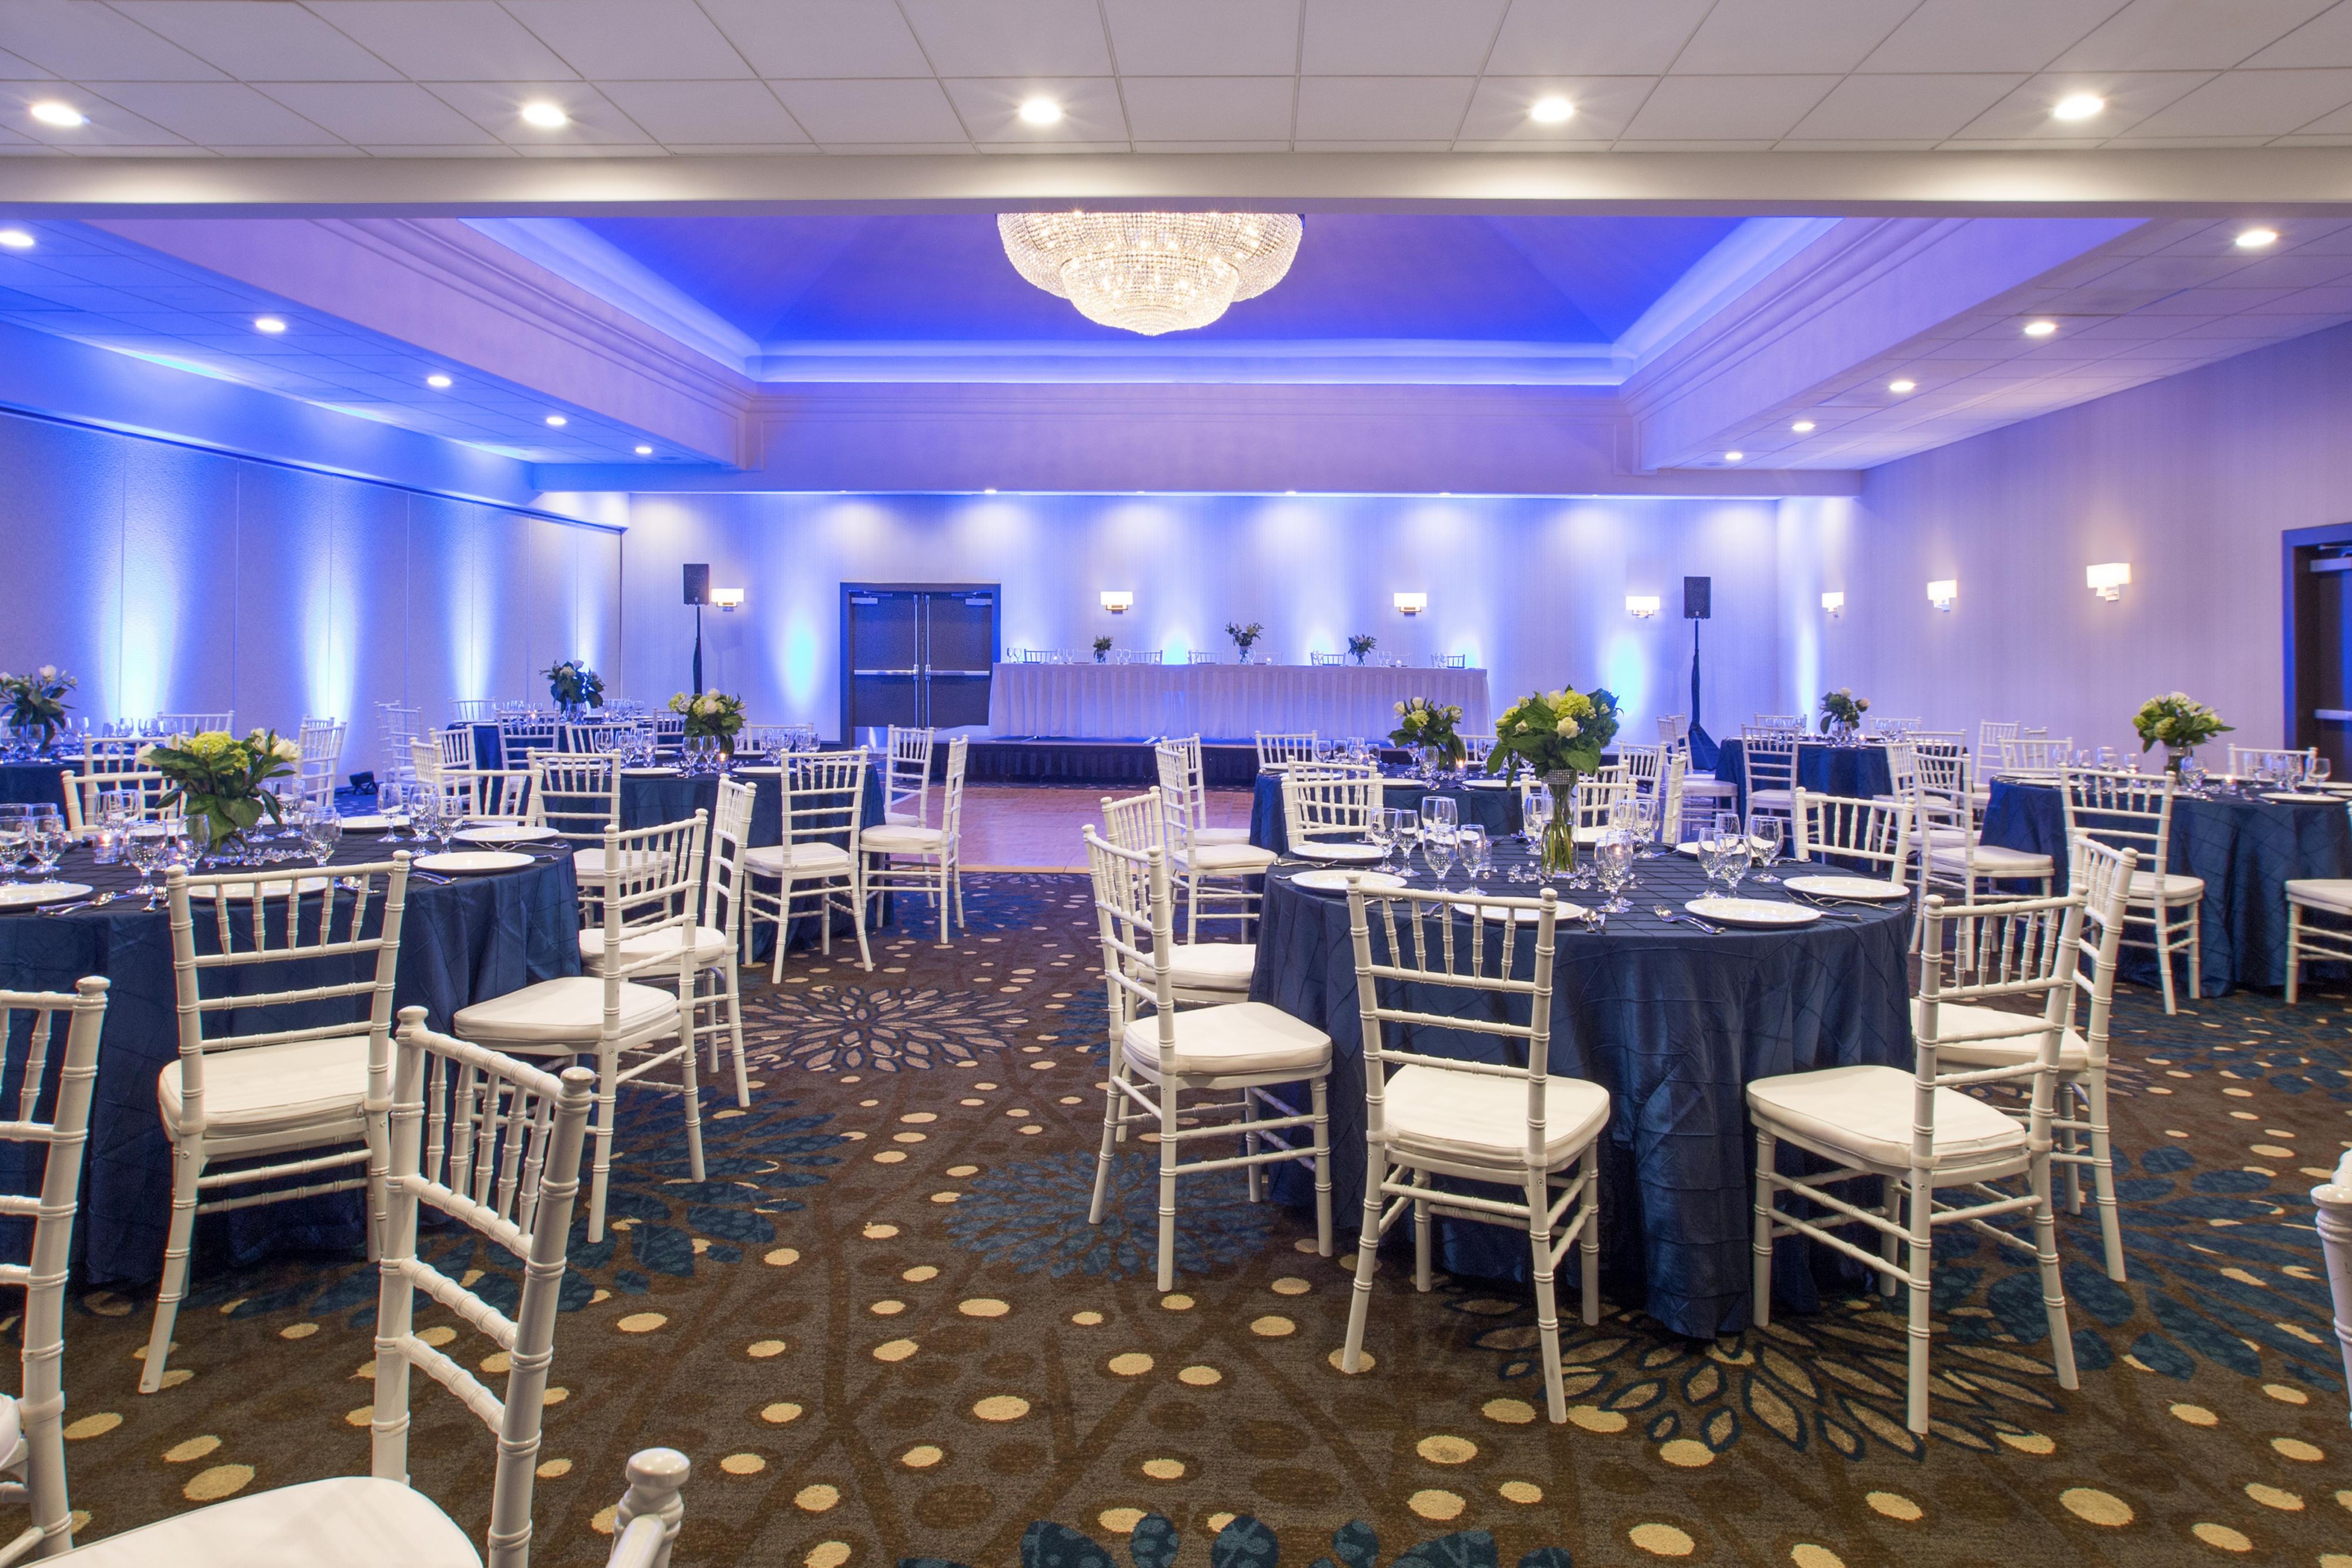 Let us take care of you and your event in our Ball Room.